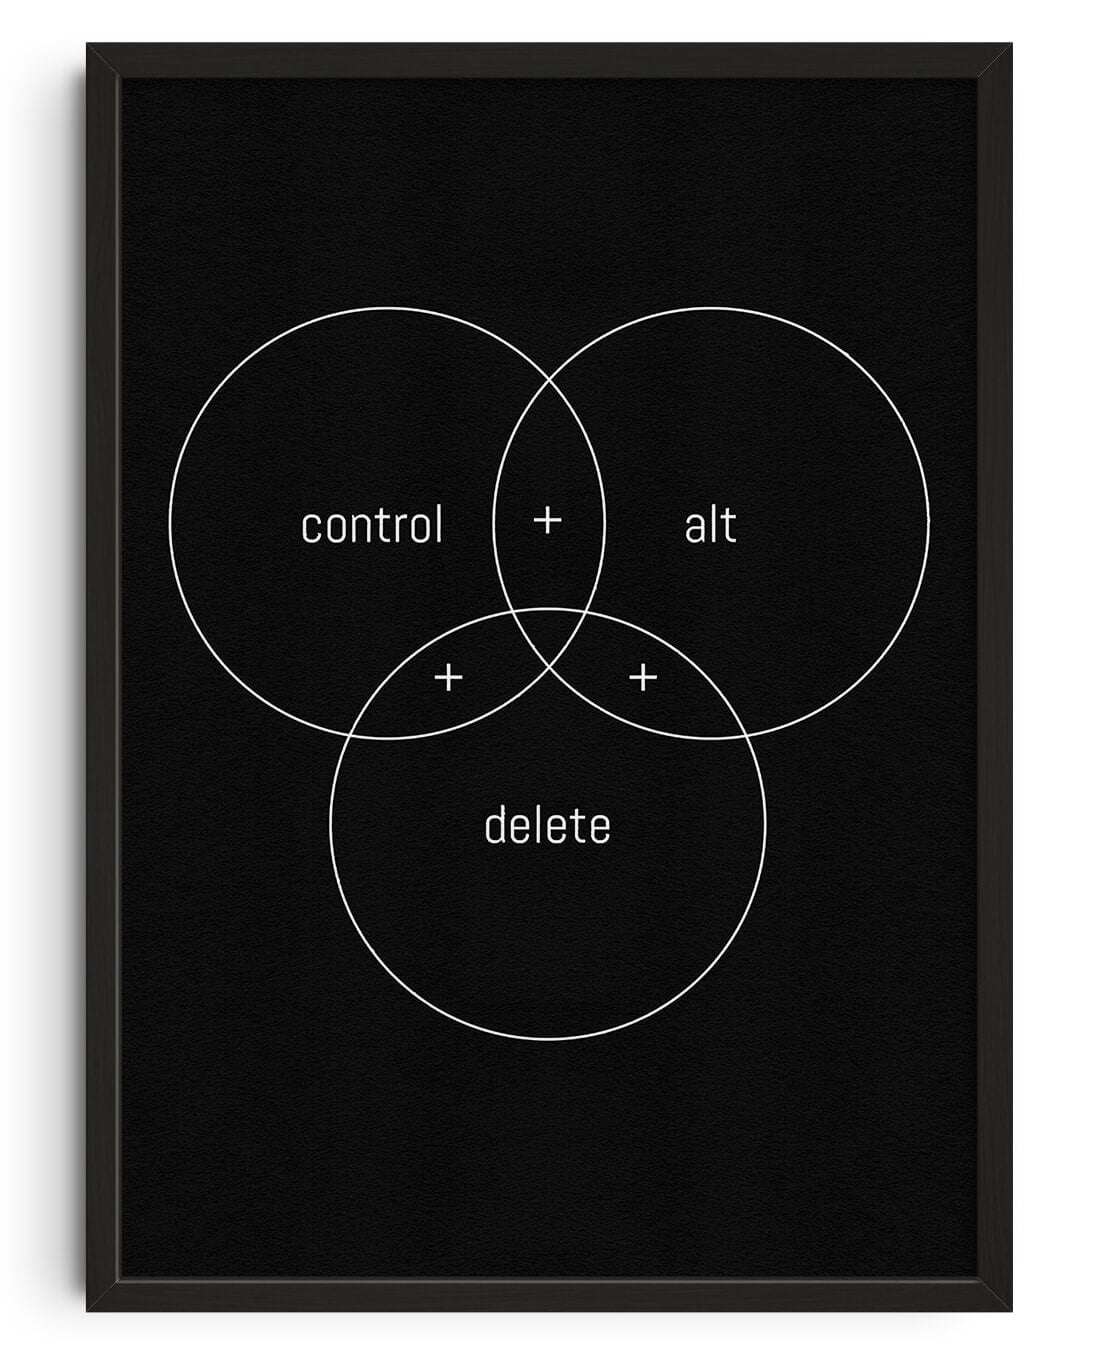 Ctrl+Alt+Del by Roman Post. contemporary wall art print from DROOL